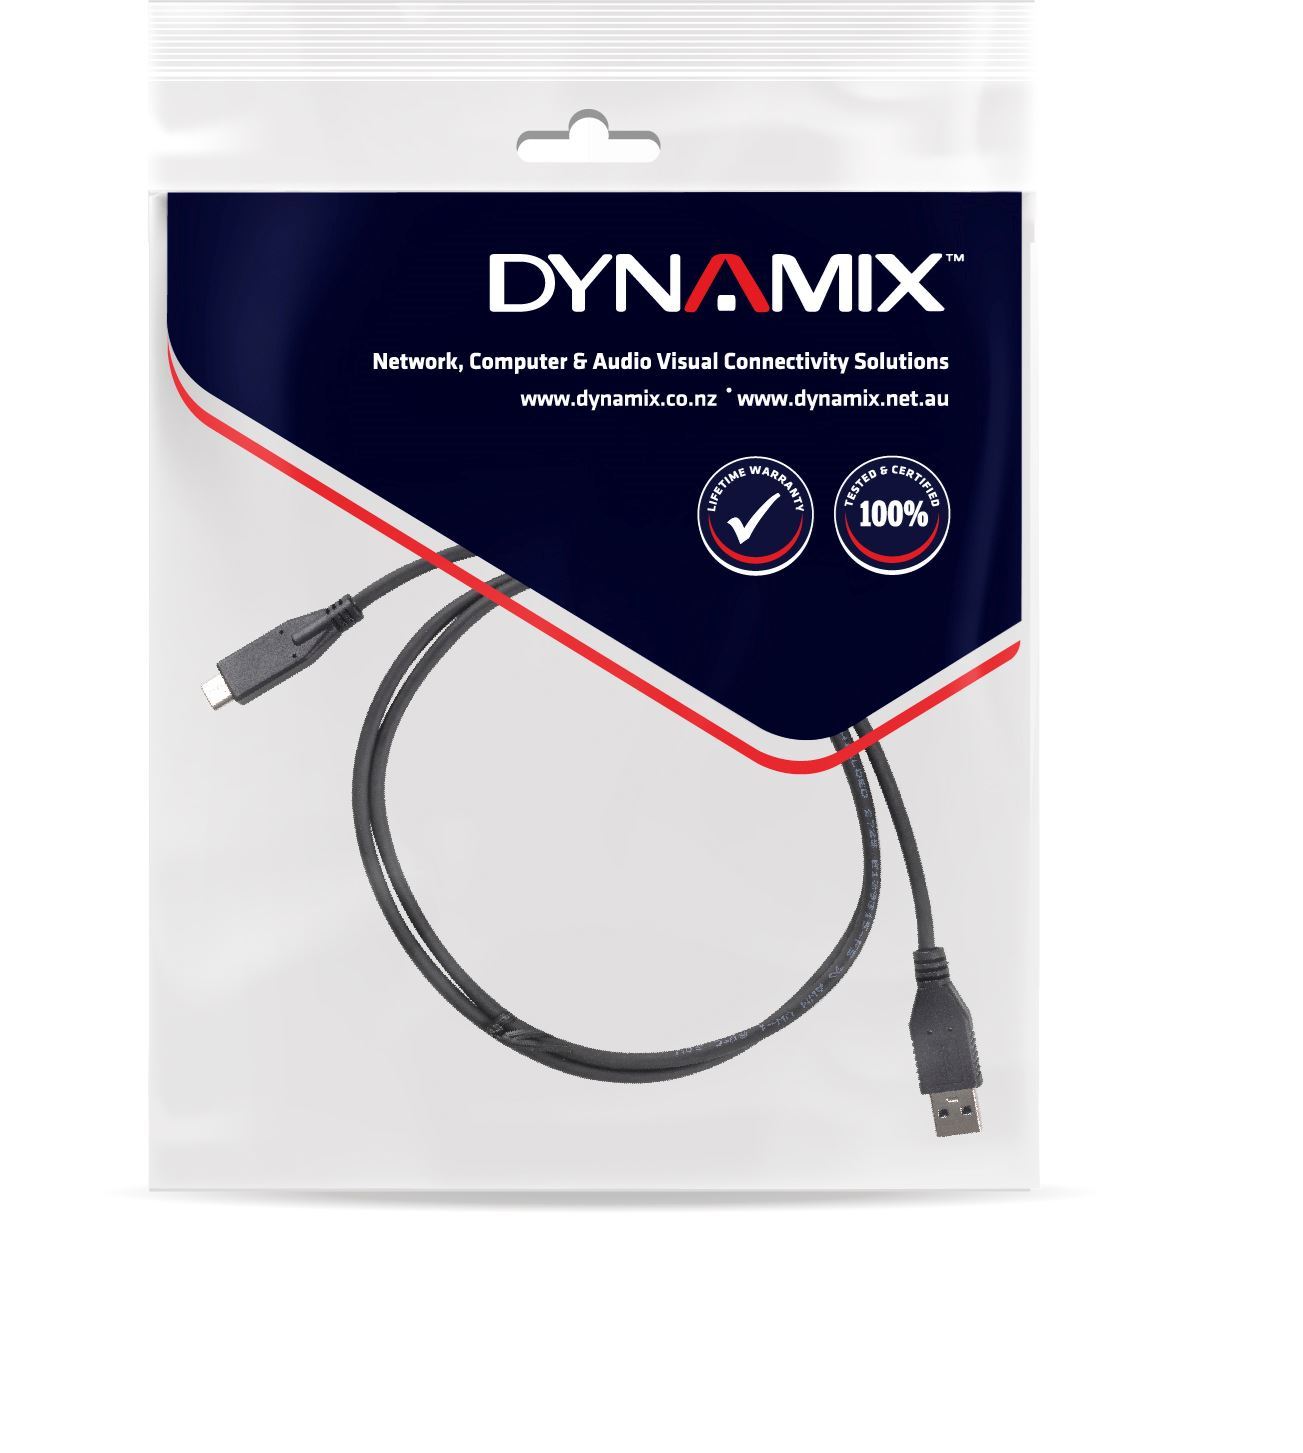 DYNAMIX_2M,_USB_3.1_USB-C_Male_to_USB-A_Male_Cable._Black_Colour._Up_to_10G_Data_Transfer_Speed,_Supports_3A_Current. 1141